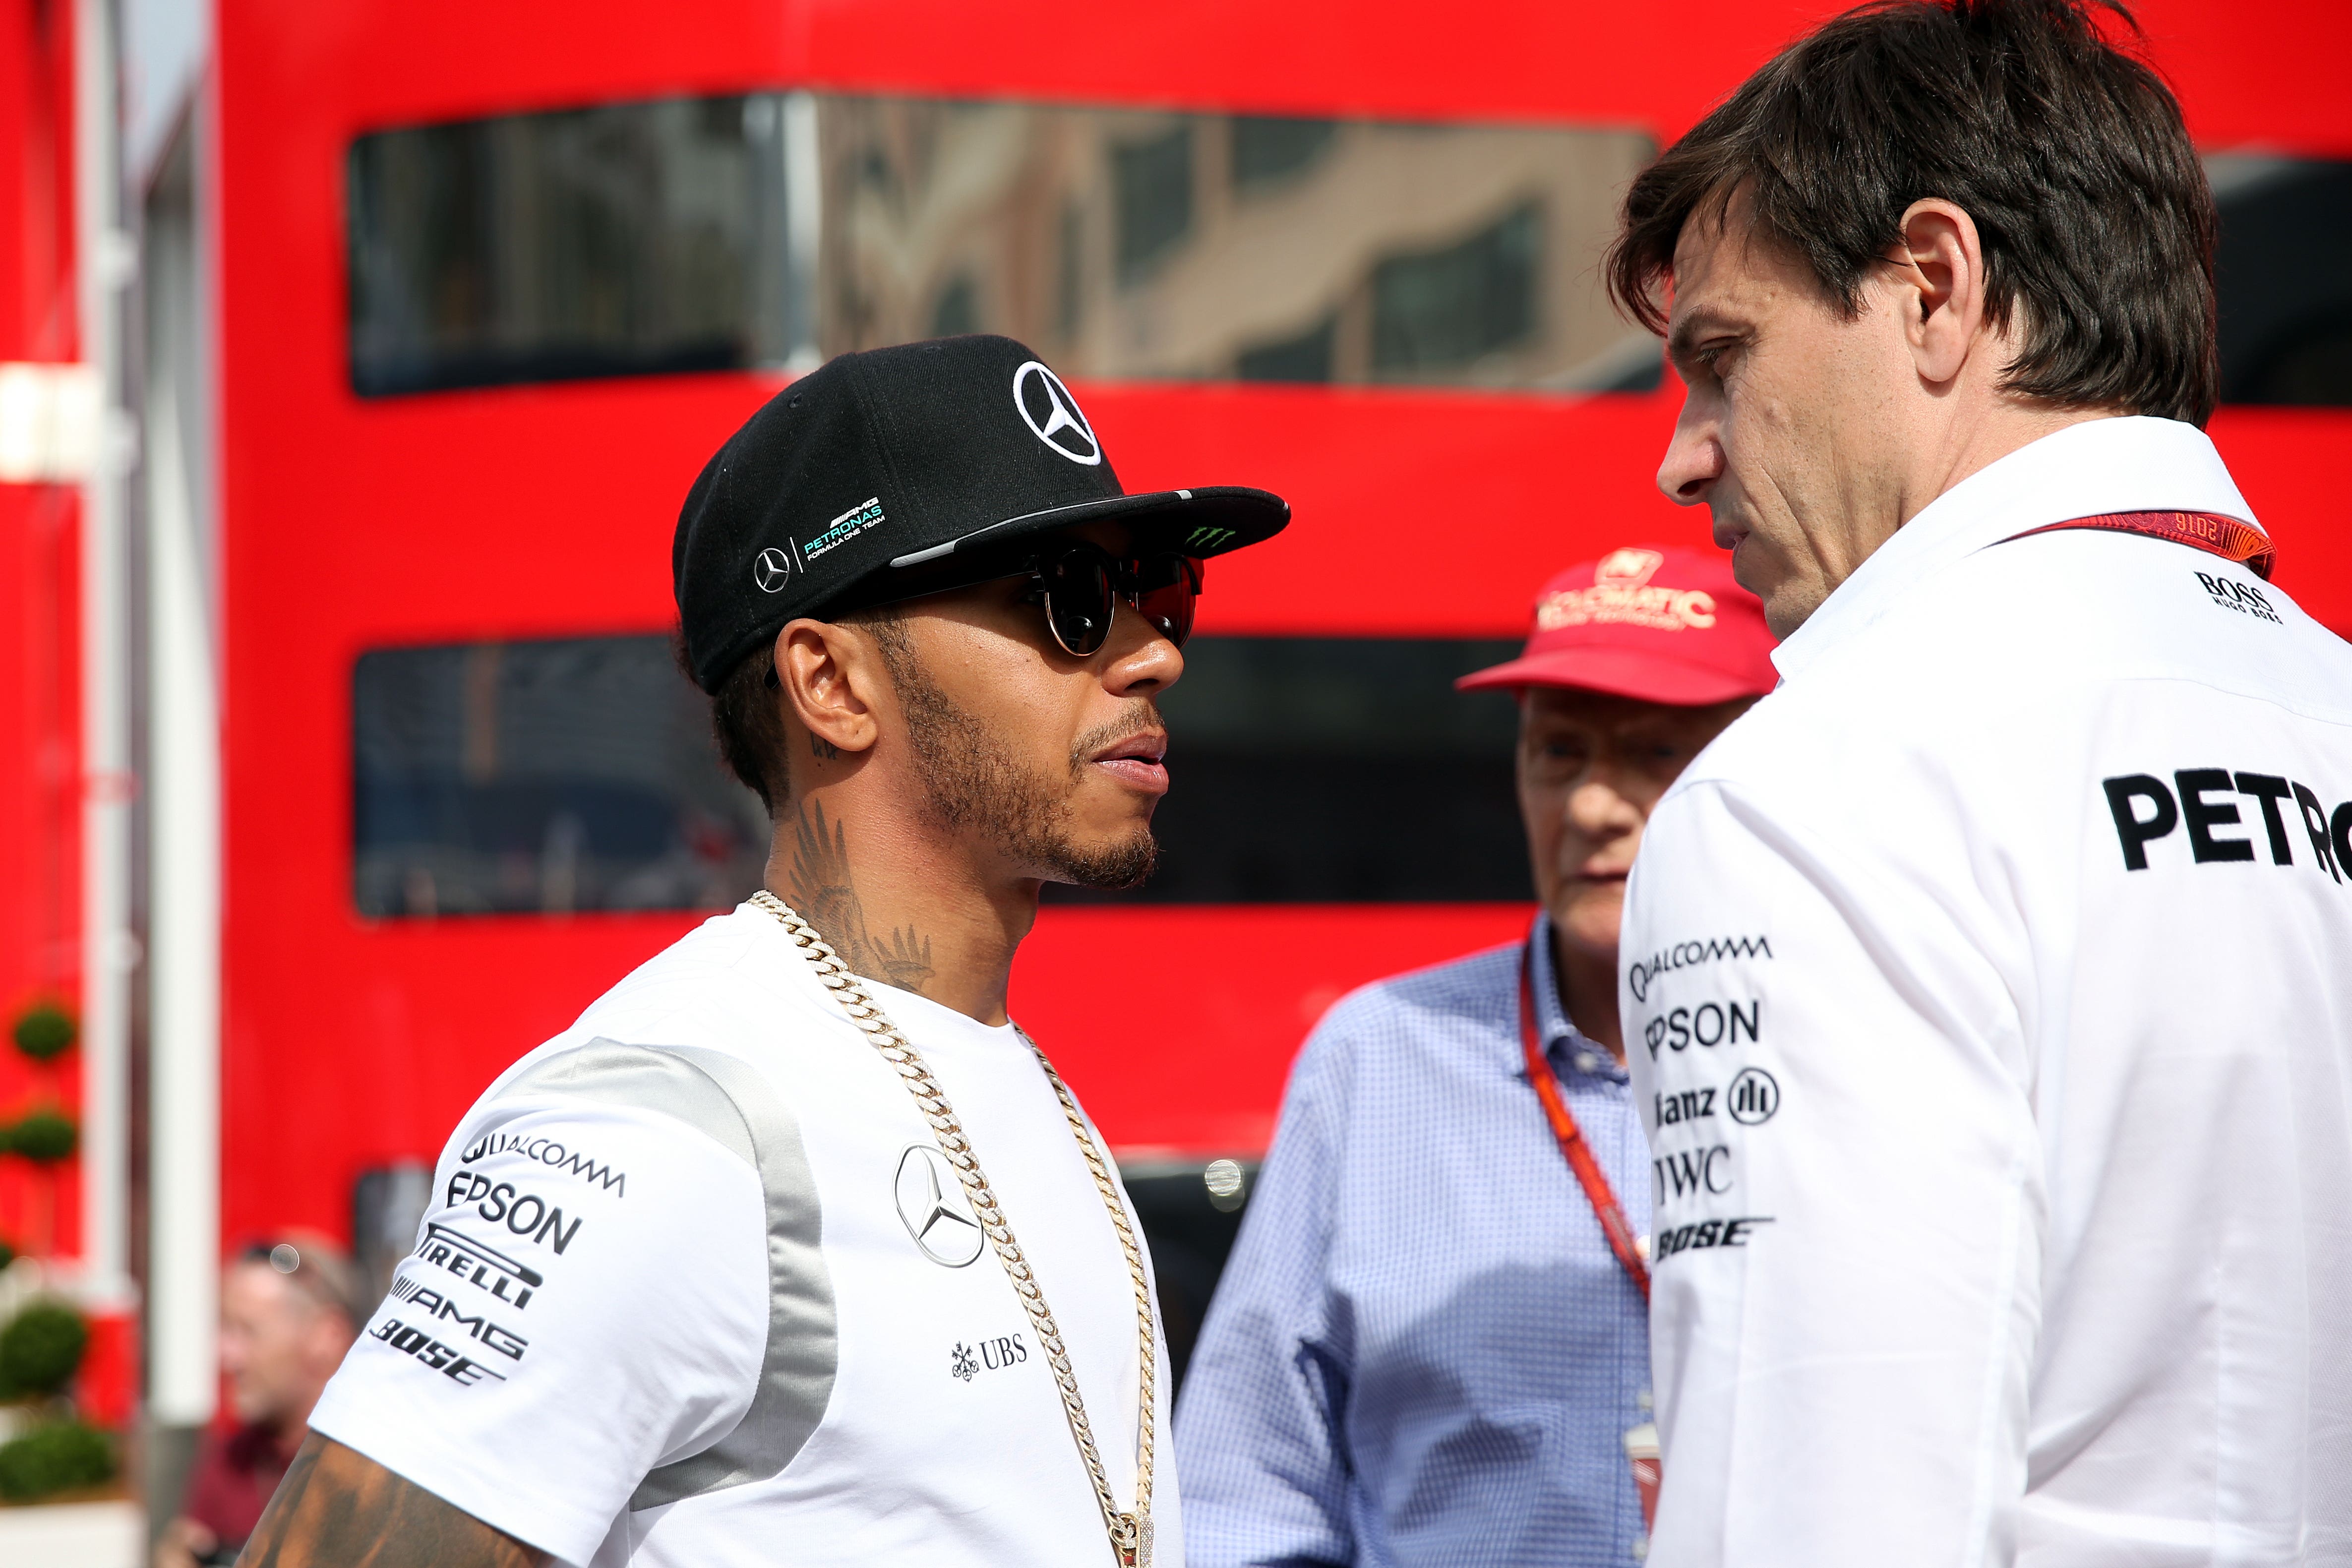 Mercedes boss Toto Wolff spoke to the media on riday after Lewis Hamilton’s Ferrari decision